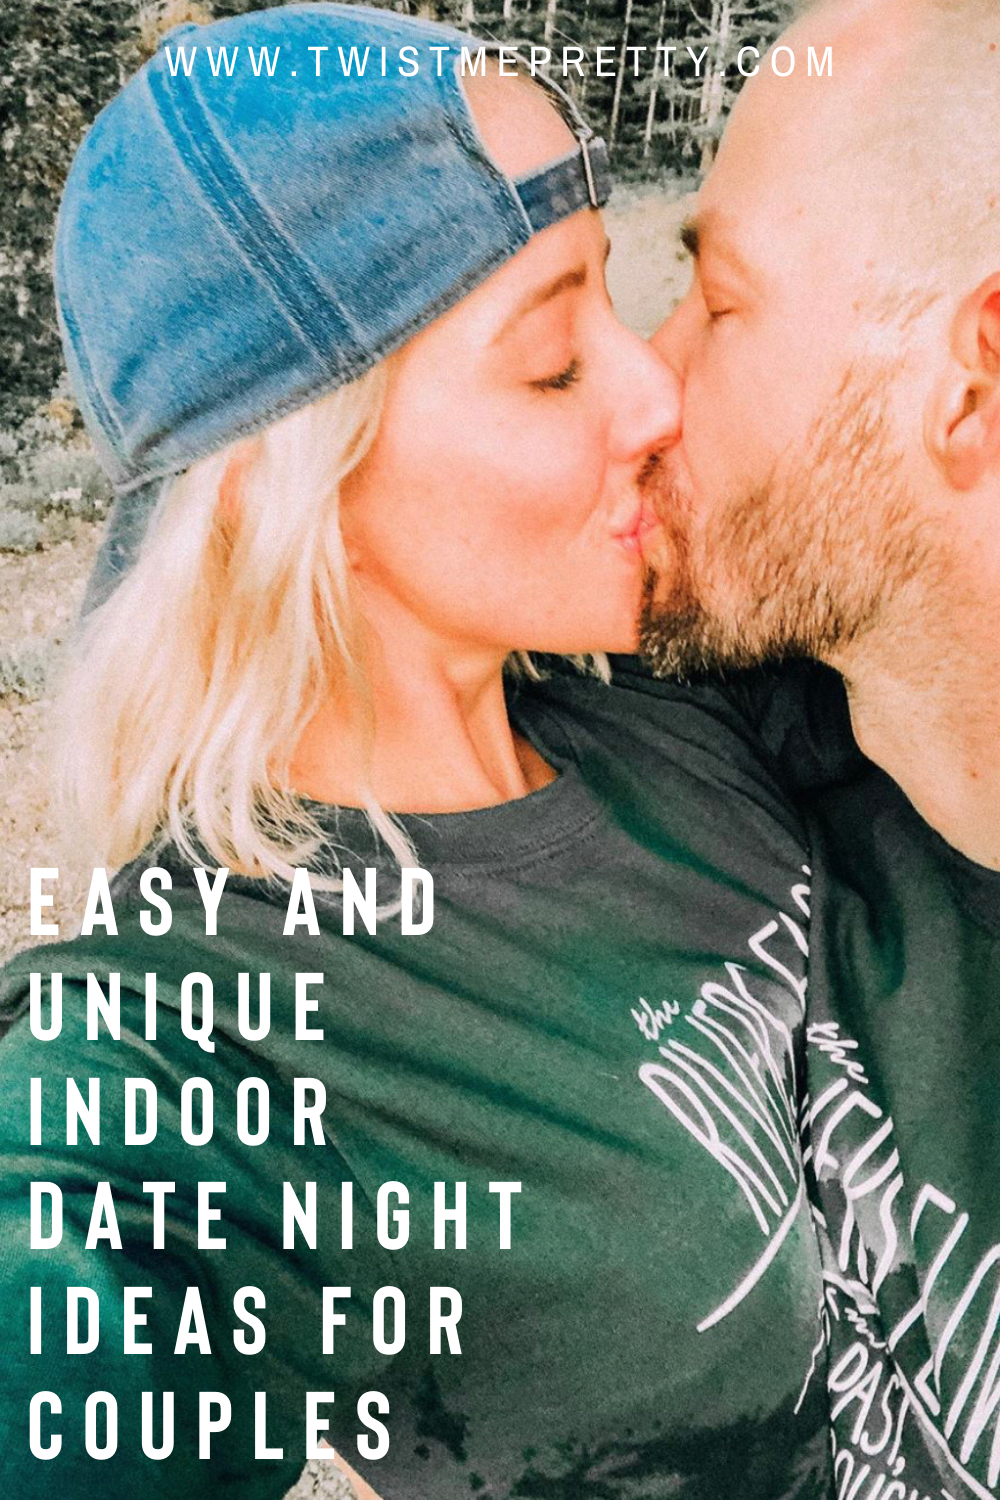 Easy and unique date night ideas for couples www.twistmepretty.com